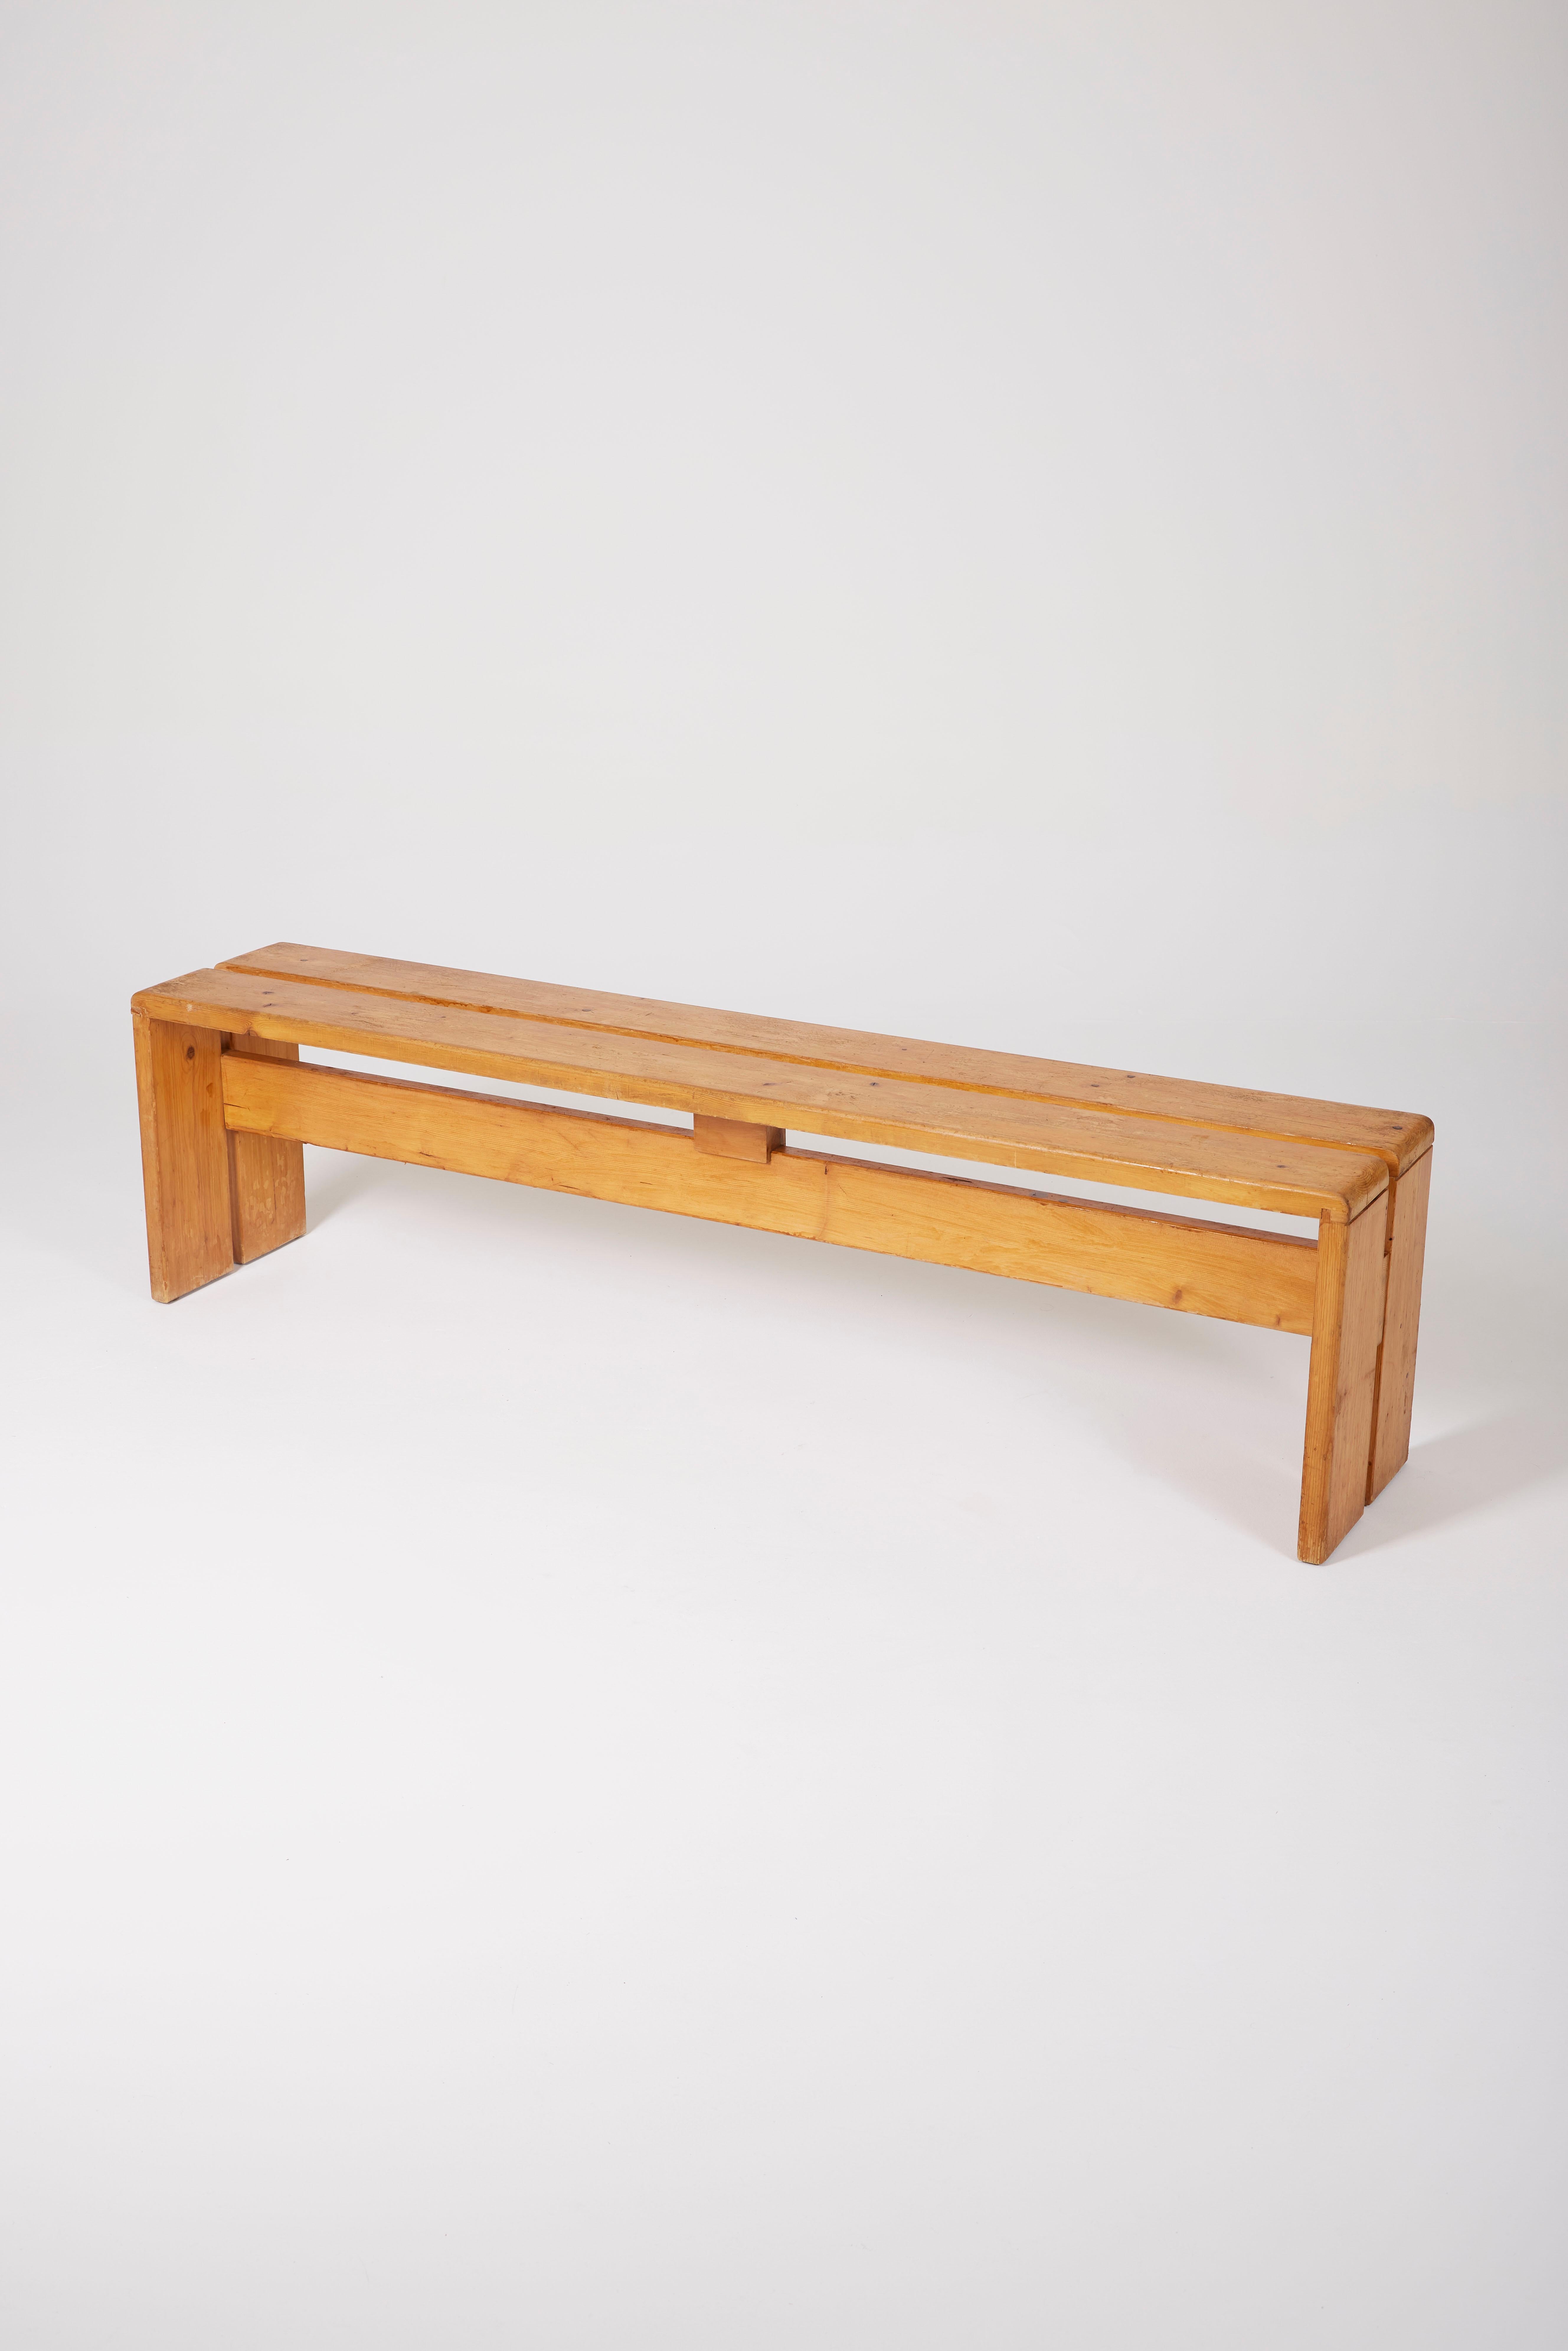 Solid pine bench designed by Charlotte Perriand for the Les Arcs ski resort, 1970s. In very good condition, with very slight signs of wear.
LP1766